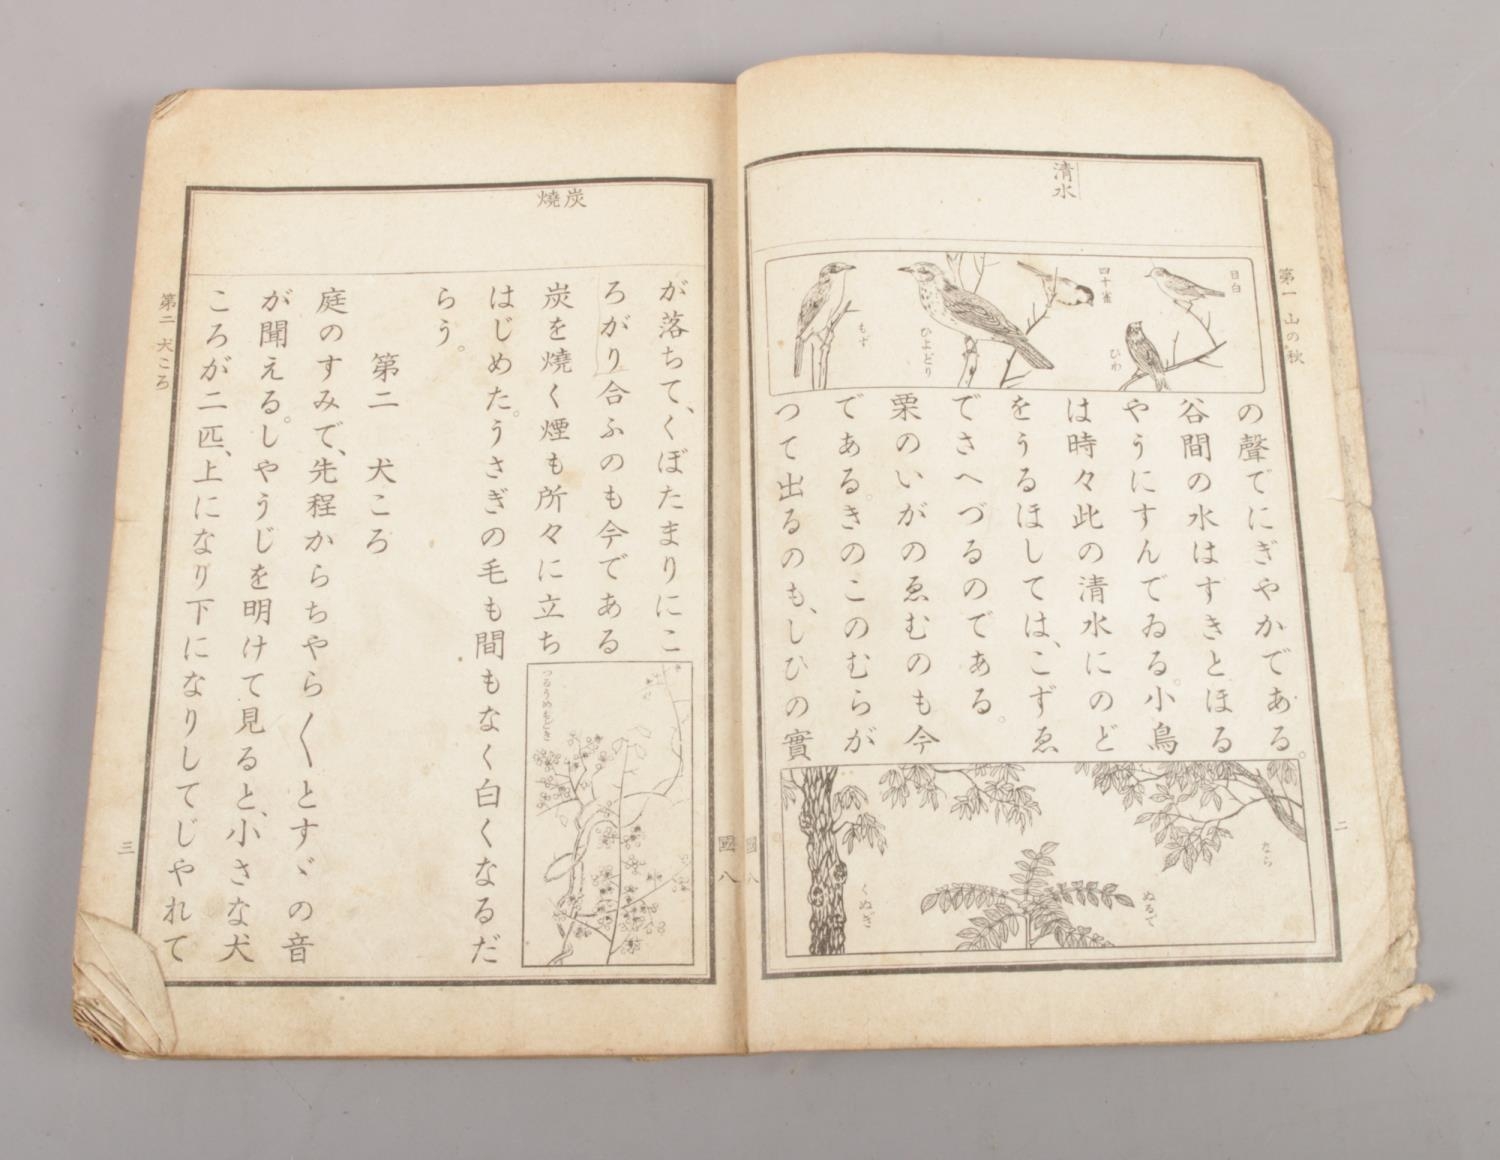 A vintage Japanese book with calligraphy & illustrations. - Image 3 of 4